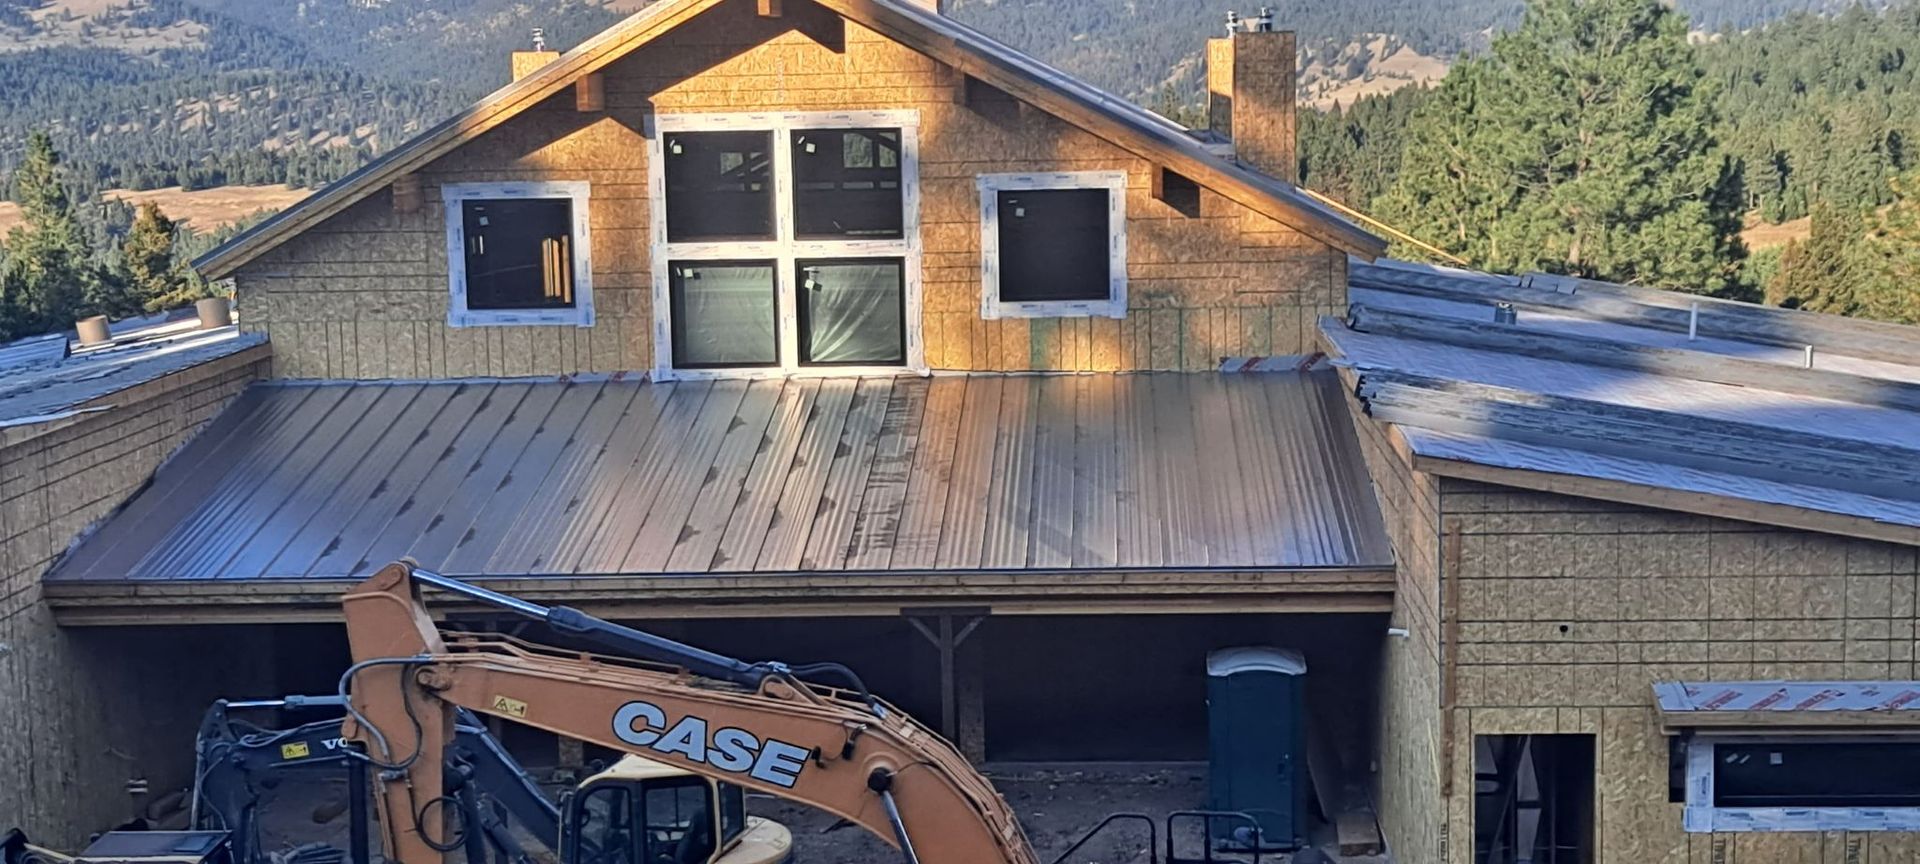 Butte Roofing Company, Metal Roofing